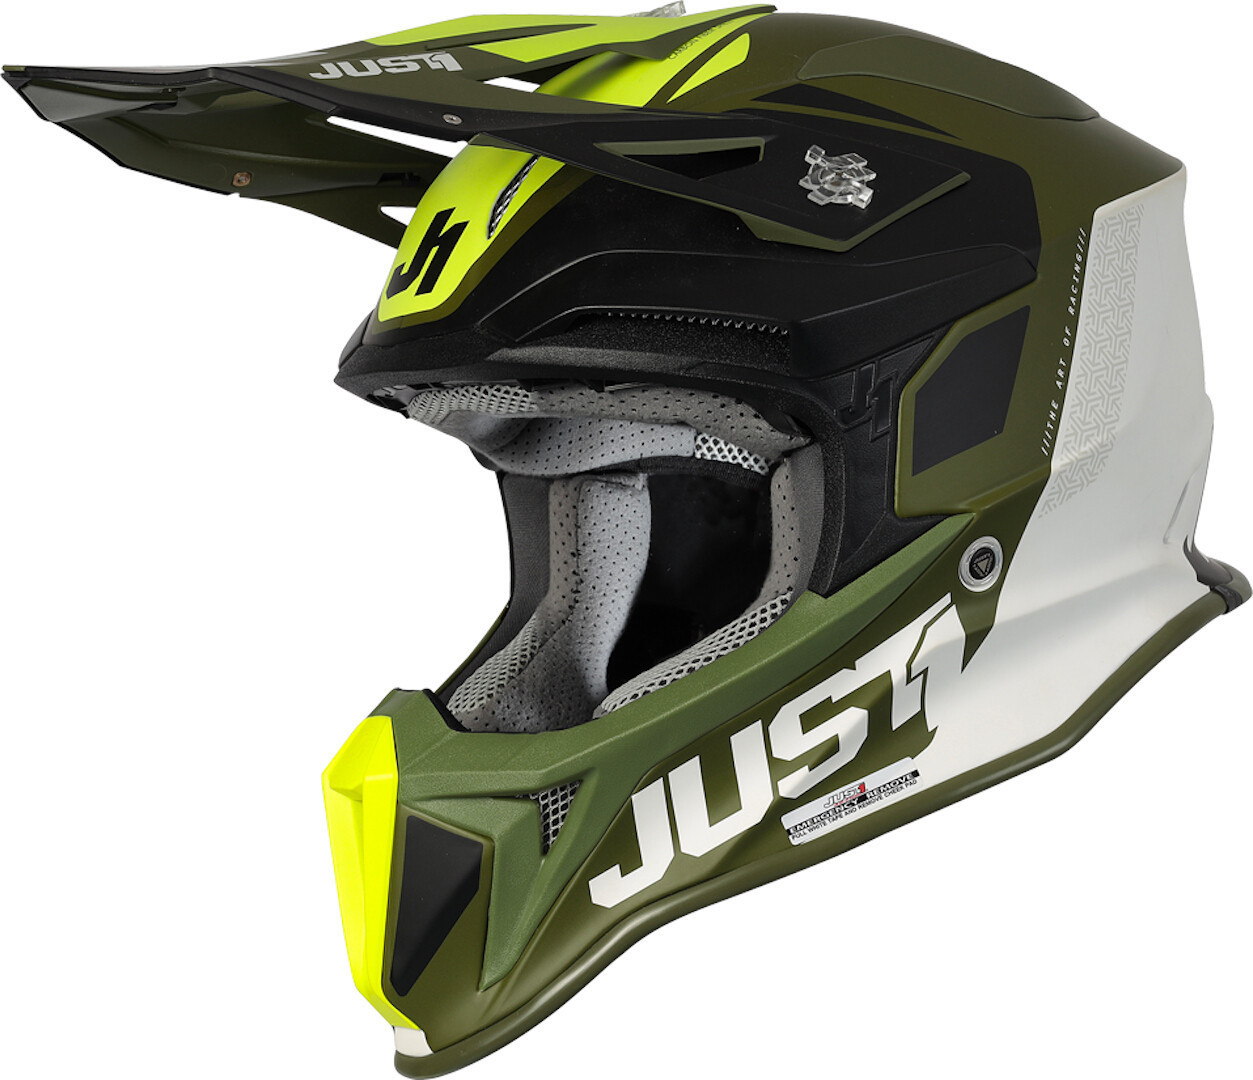 Image of Just1 J18 Pulsar Army Limited Edition Casco motocross, nero-bianco-verde, dimensione M